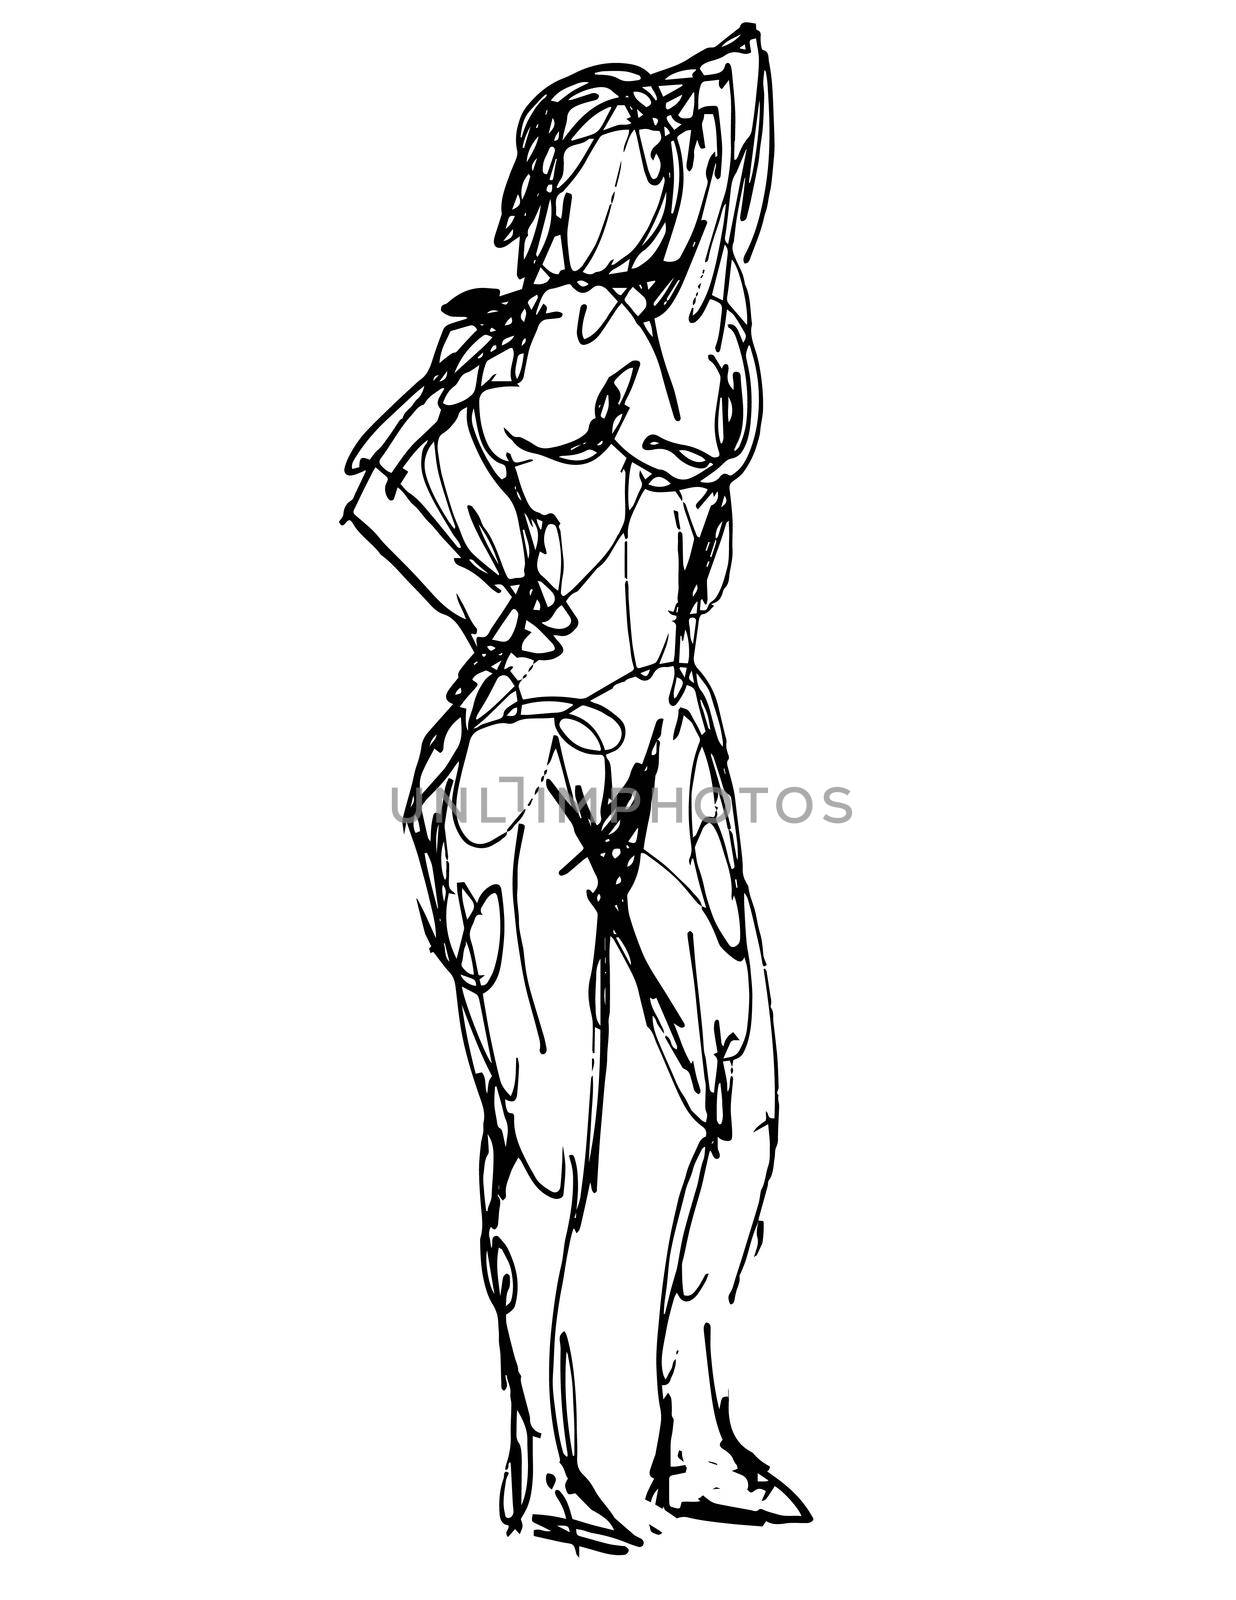 Doodle art illustration of a nude female human figure posing with hand behind head front view  in continuous line drawing style in black and white on isolated background.